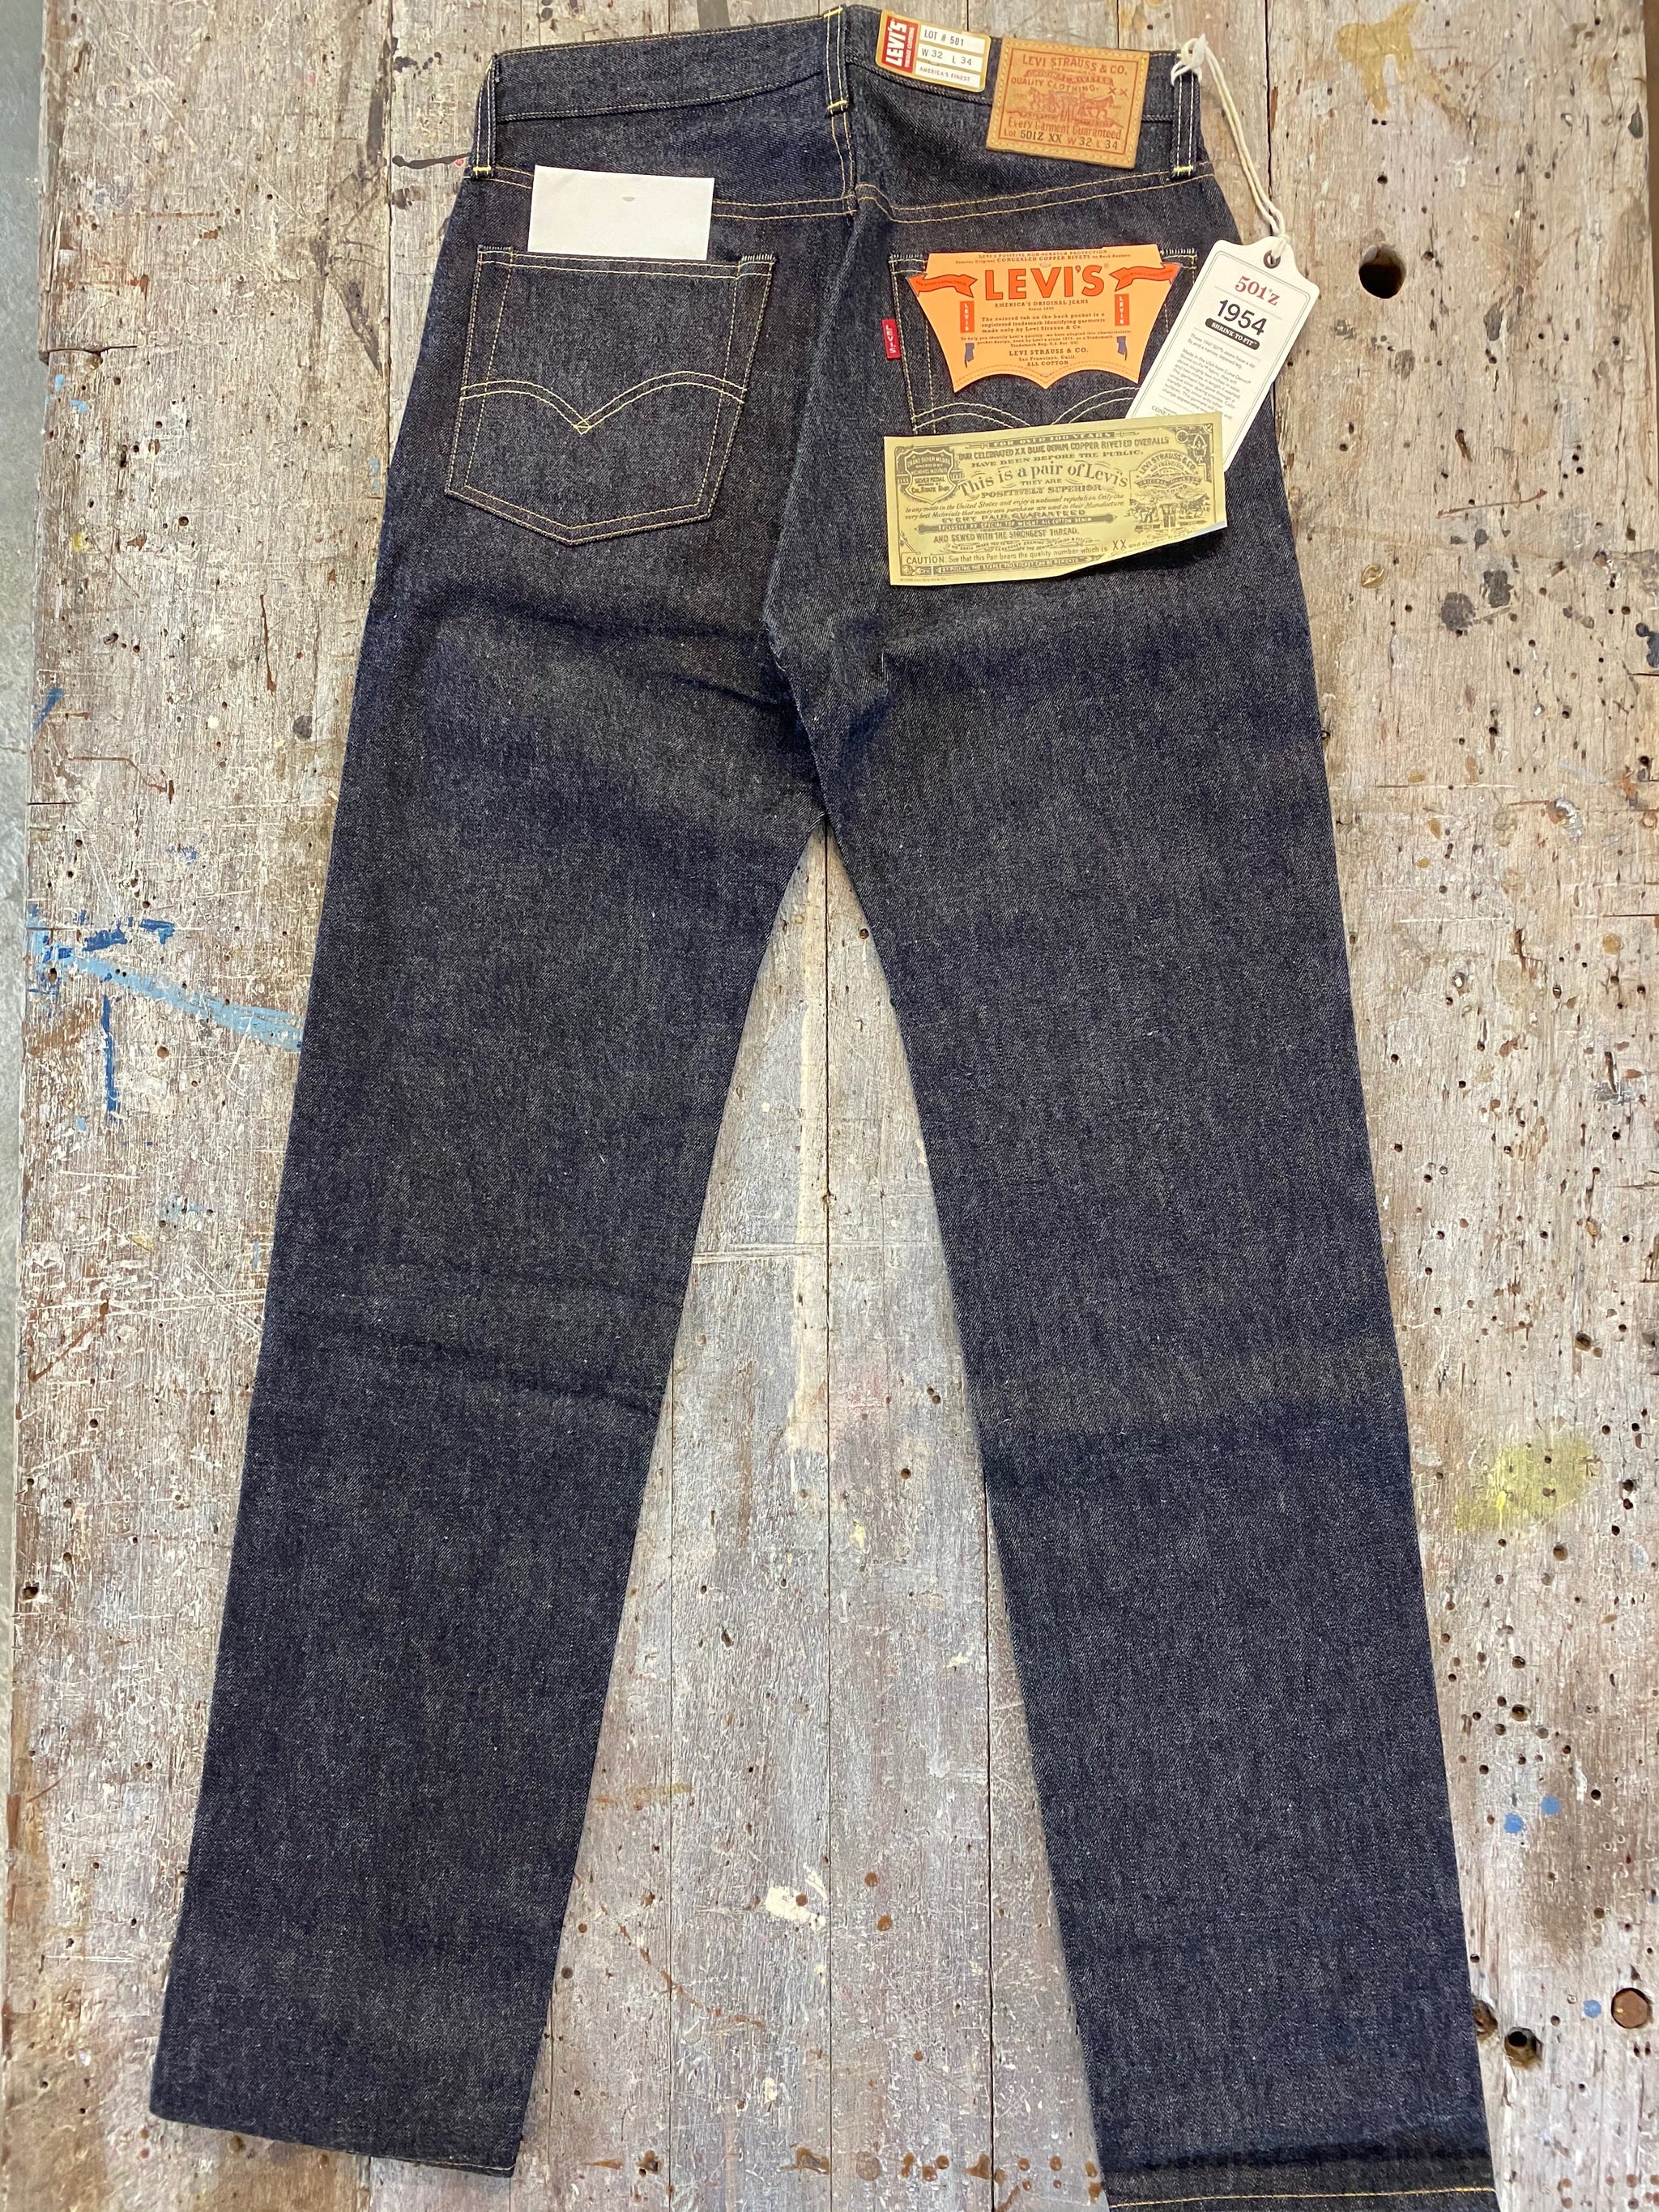 LEVIS VINTAGE CLOTHING 1954 501Z RAW SHRINK TO FIT - Elroy Clothing